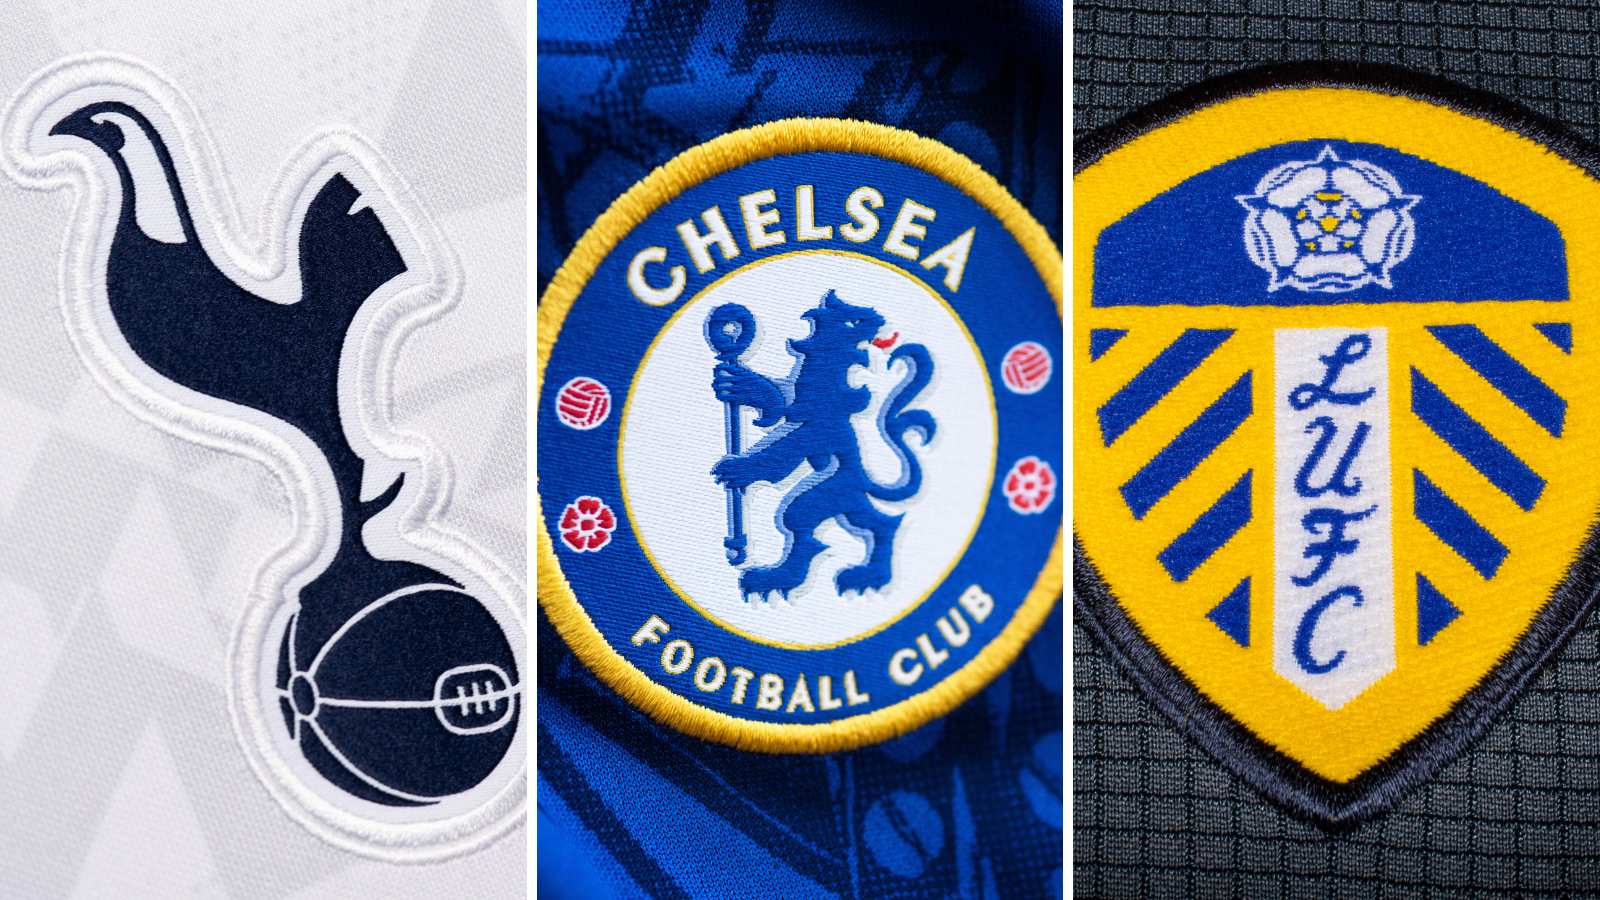 The badges of Spurs, Chelsea and Leeds.